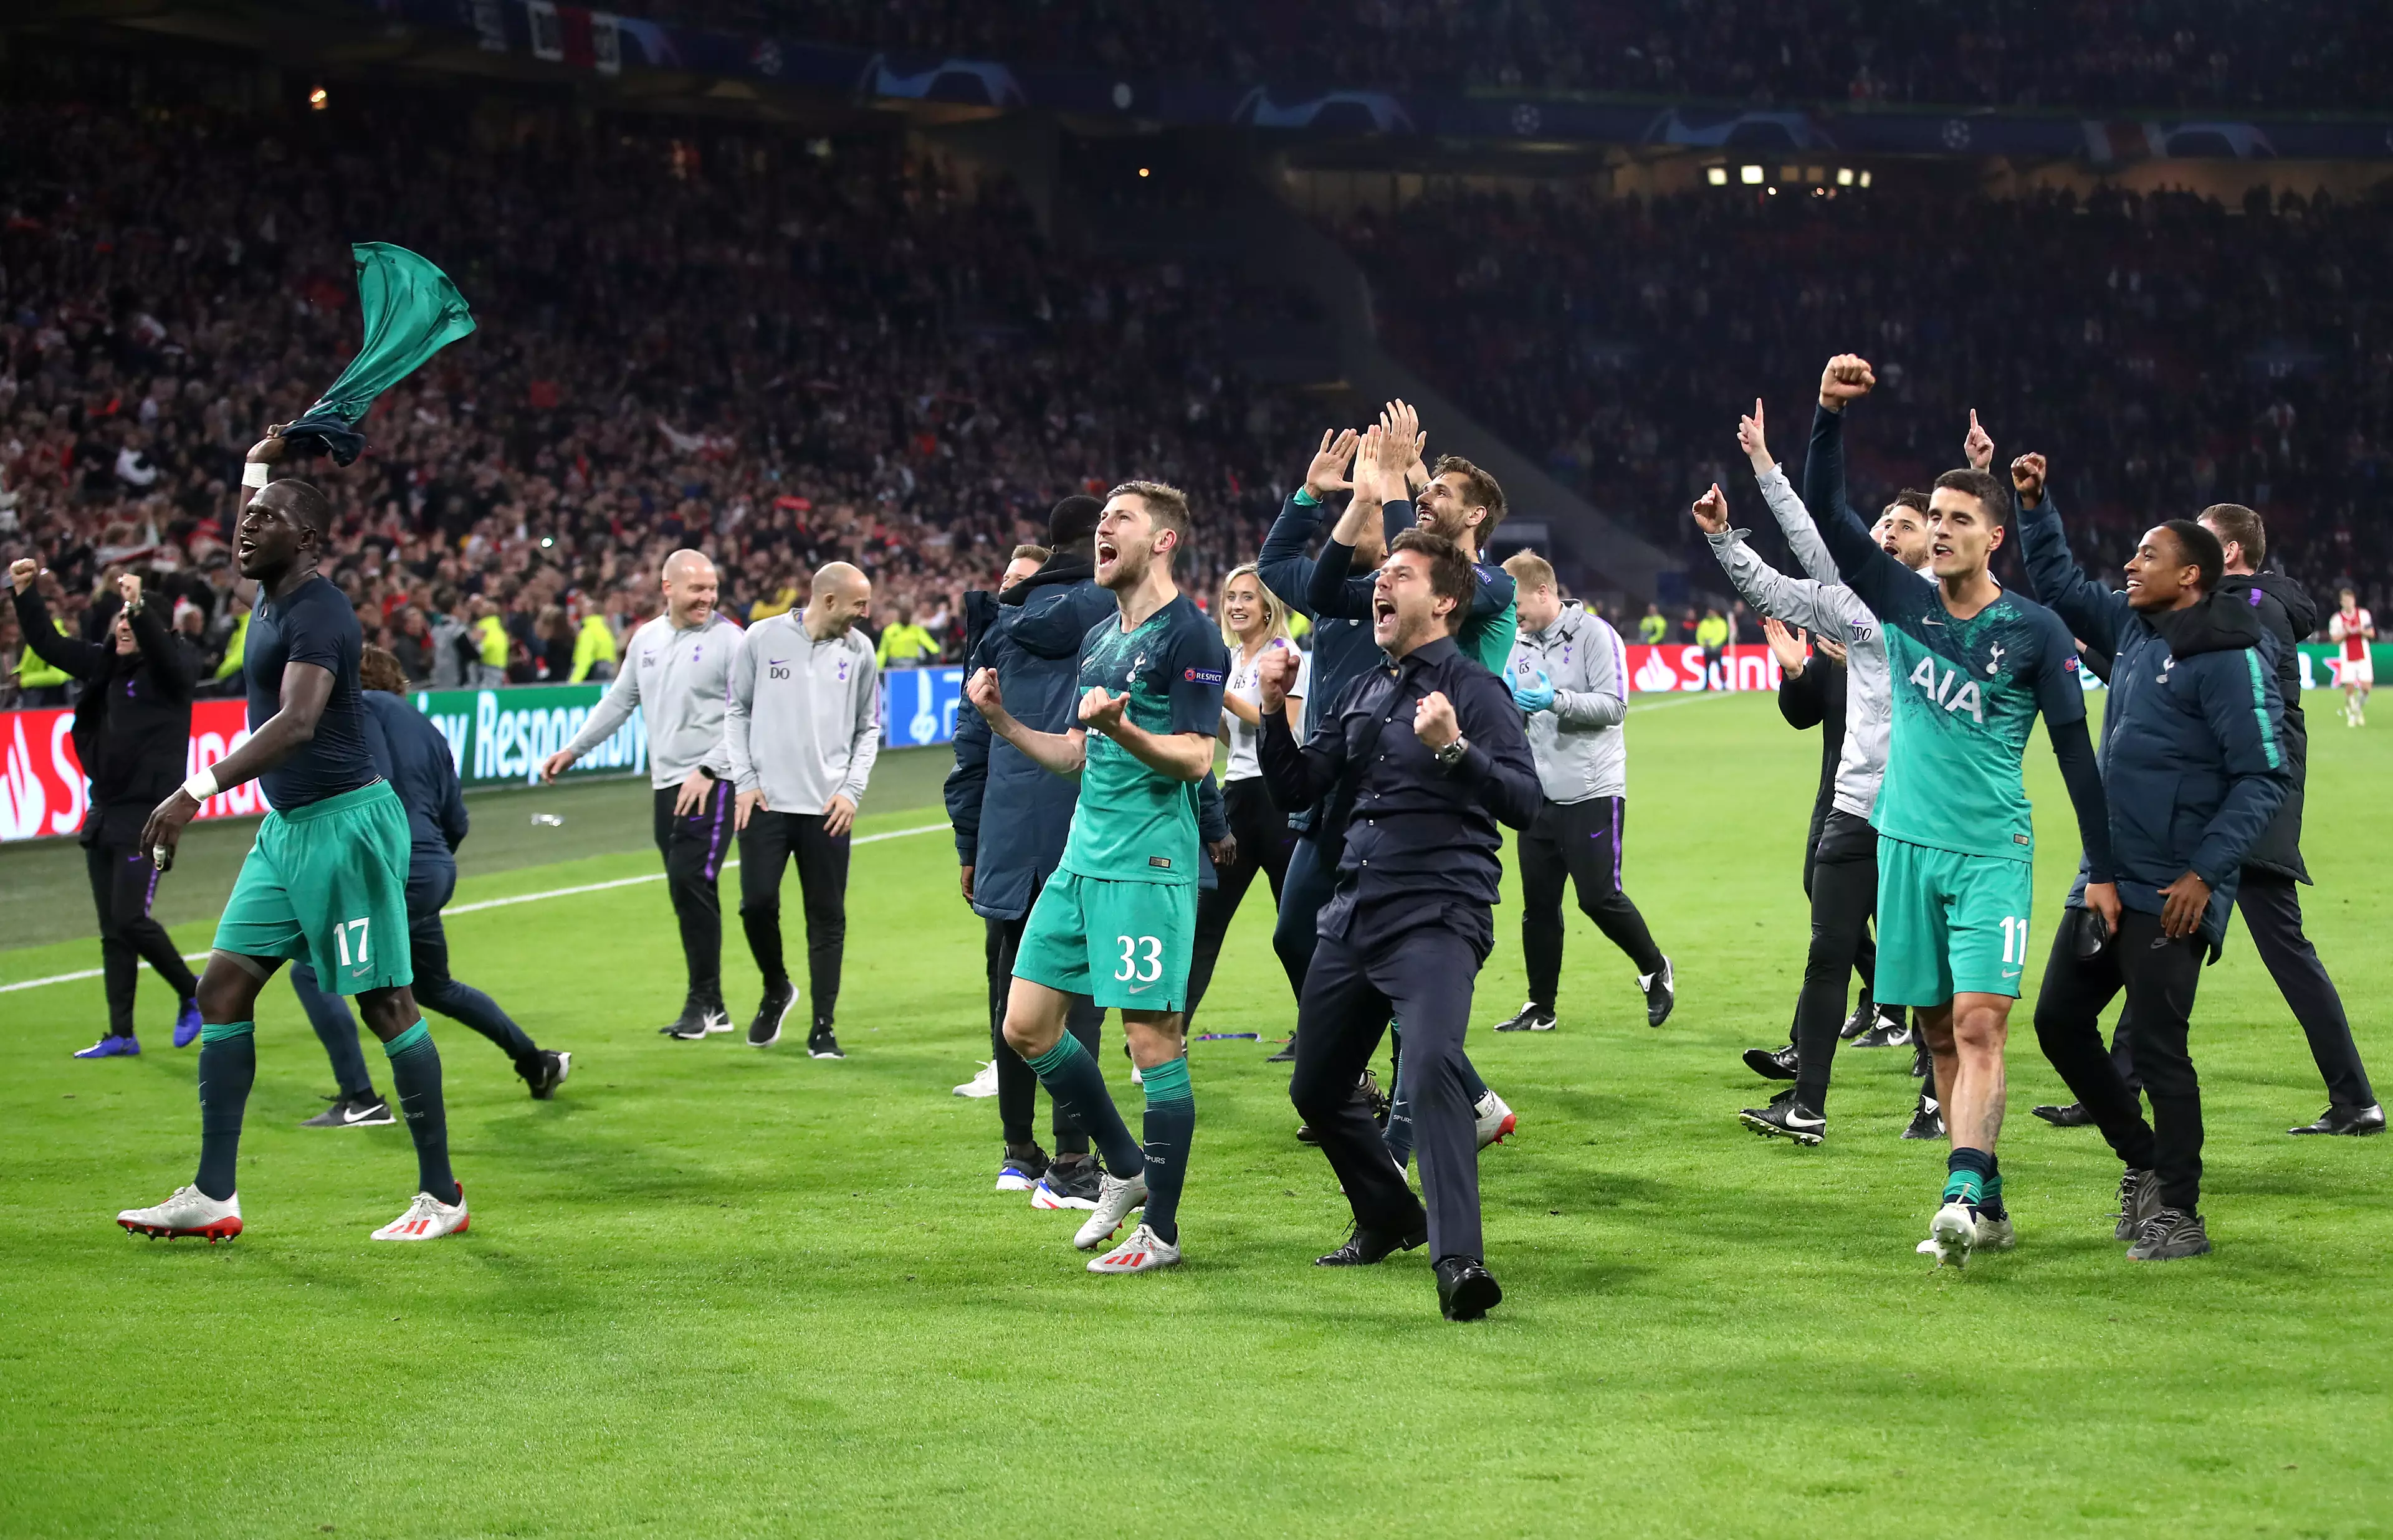 Pochettino celebrates after beating Ajax in the Champions League semi final, his greatest night for Spurs. Image: PA Images